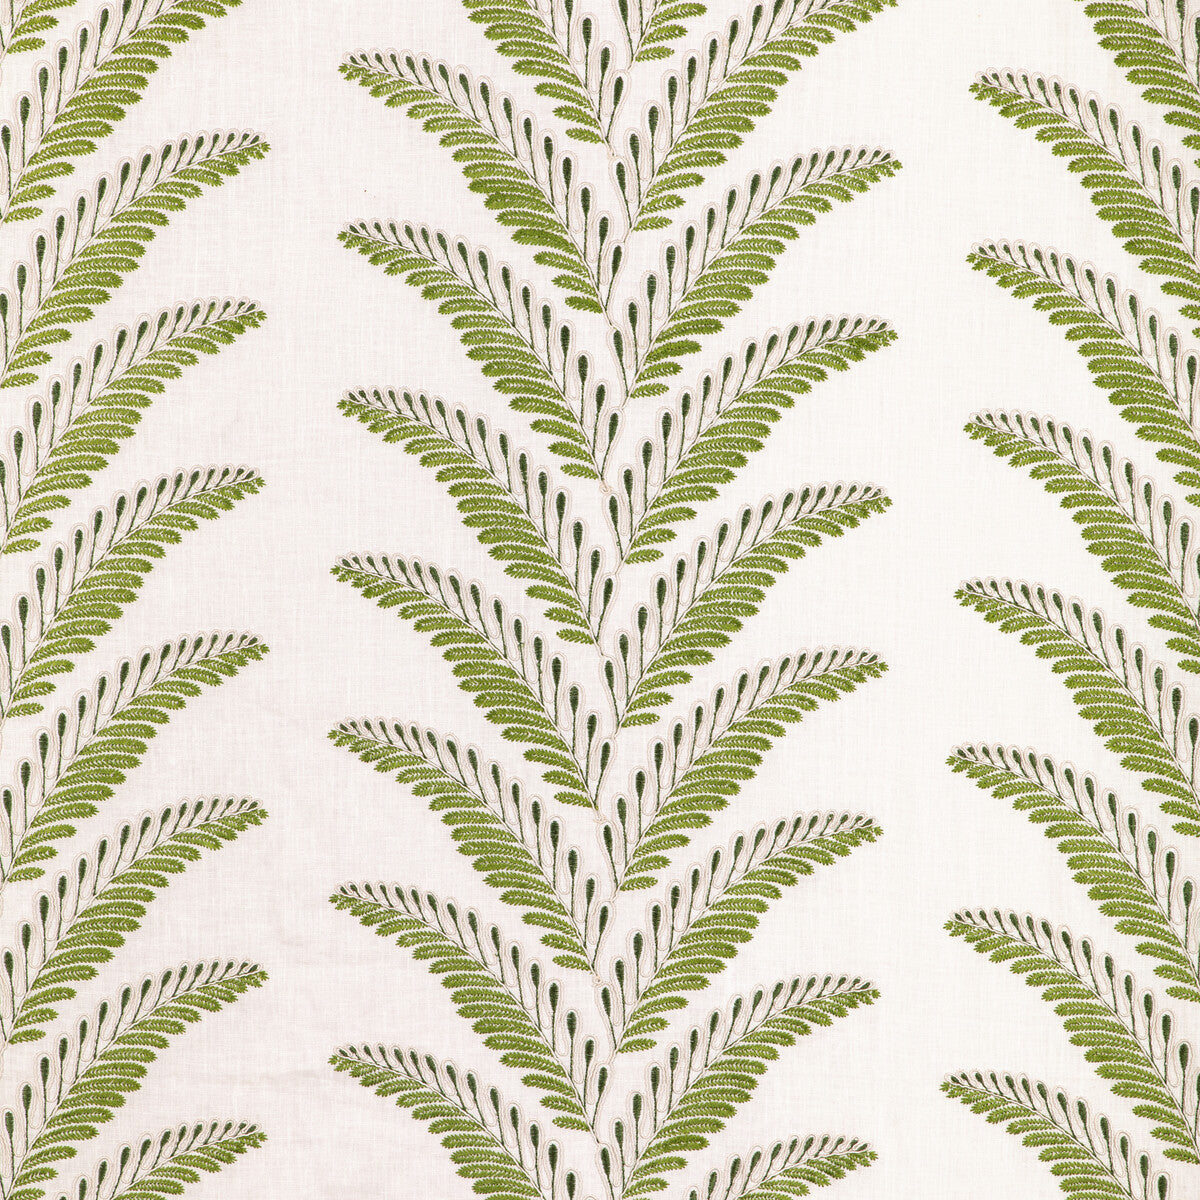 Fougere Emb fabric in leaf color - pattern 8024109.31.0 - by Brunschwig &amp; Fils in the La Menagerie collection